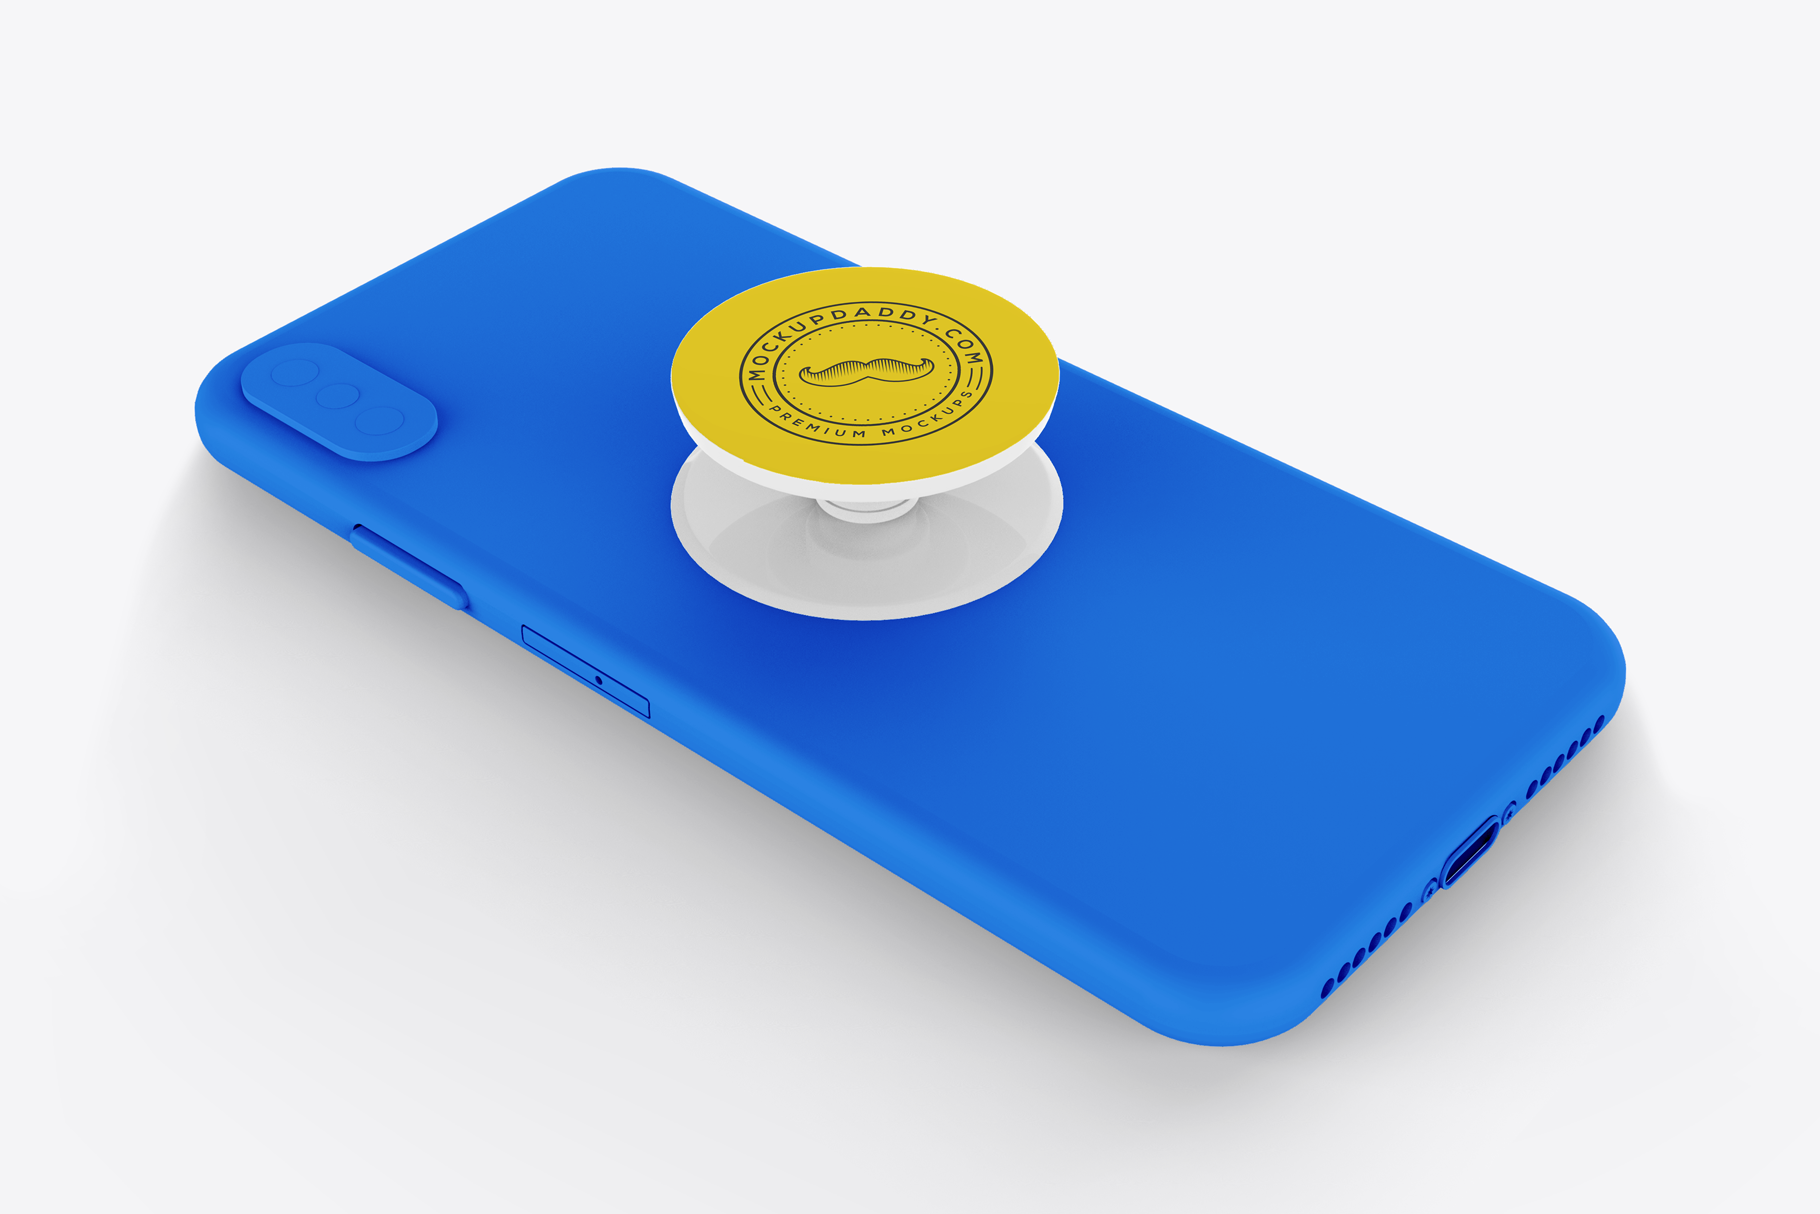 Download Popsocket Free Mockup / Free Whisky Bottle Mockup PSD Template : Very simple edit with smart layers.